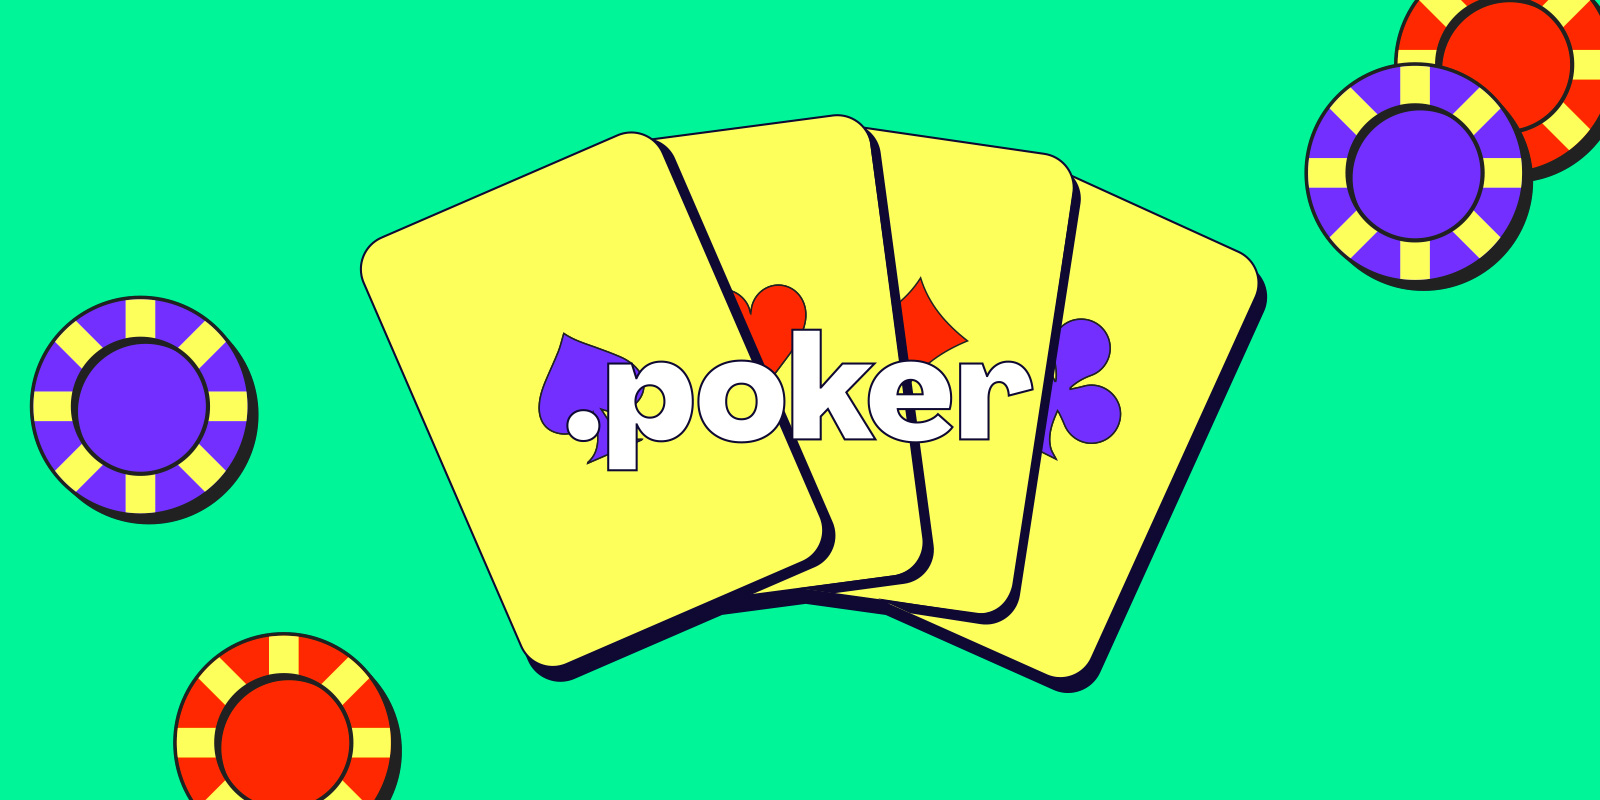 Bet on .poker, on promo this March